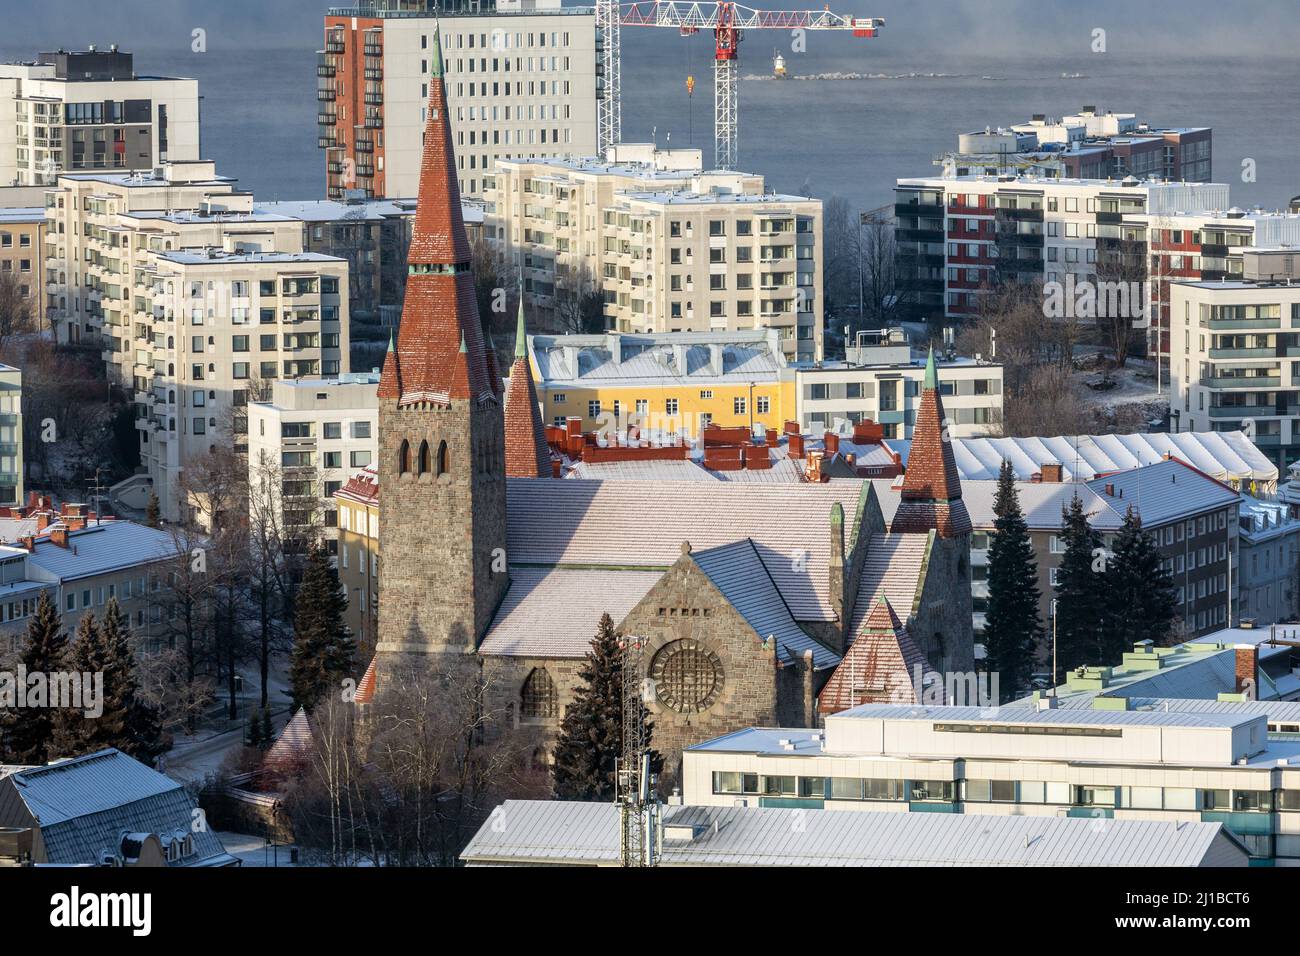 TAMPERE CATHEDRAL IN GRANITE WITH ITS THREE BELL TOWERS OF RED TILES IN WINTER AS SEEN FROM THE PANORAMIC MORO SKY BAR, TAMPERE, FINLAND, EUROPE Stock Photo